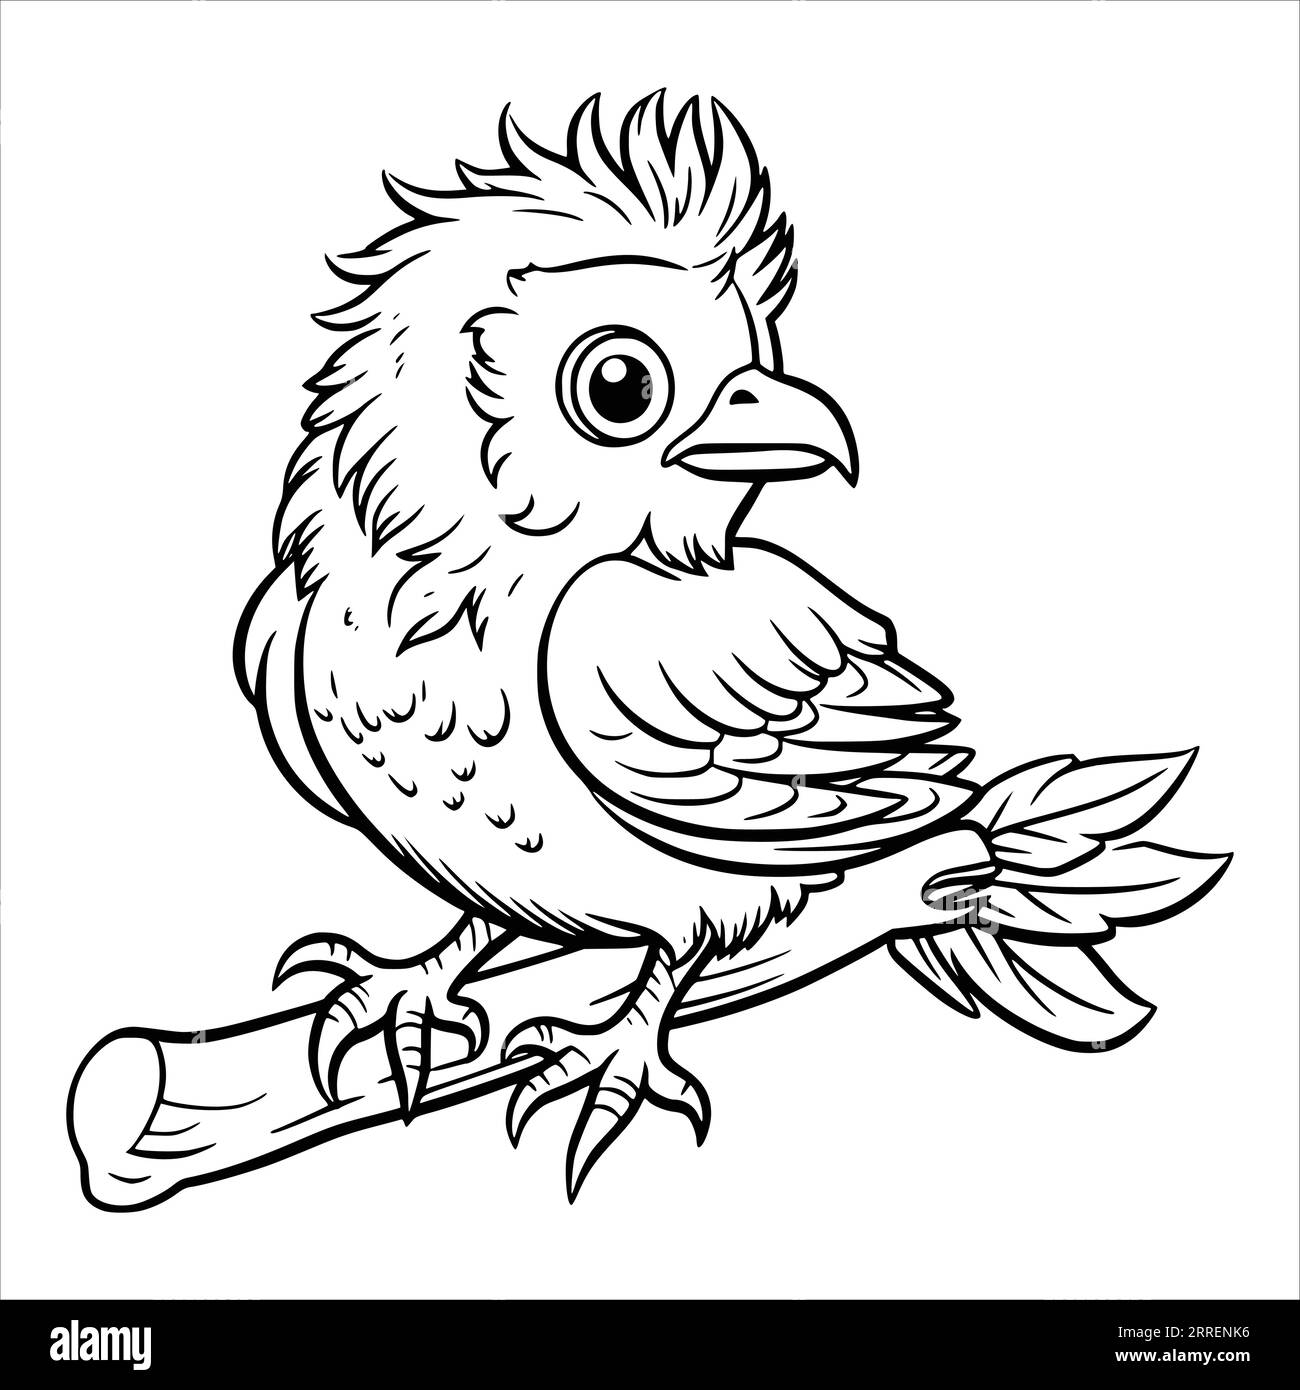 Funny Little Bird Coloring Page for Kids Stock Vector